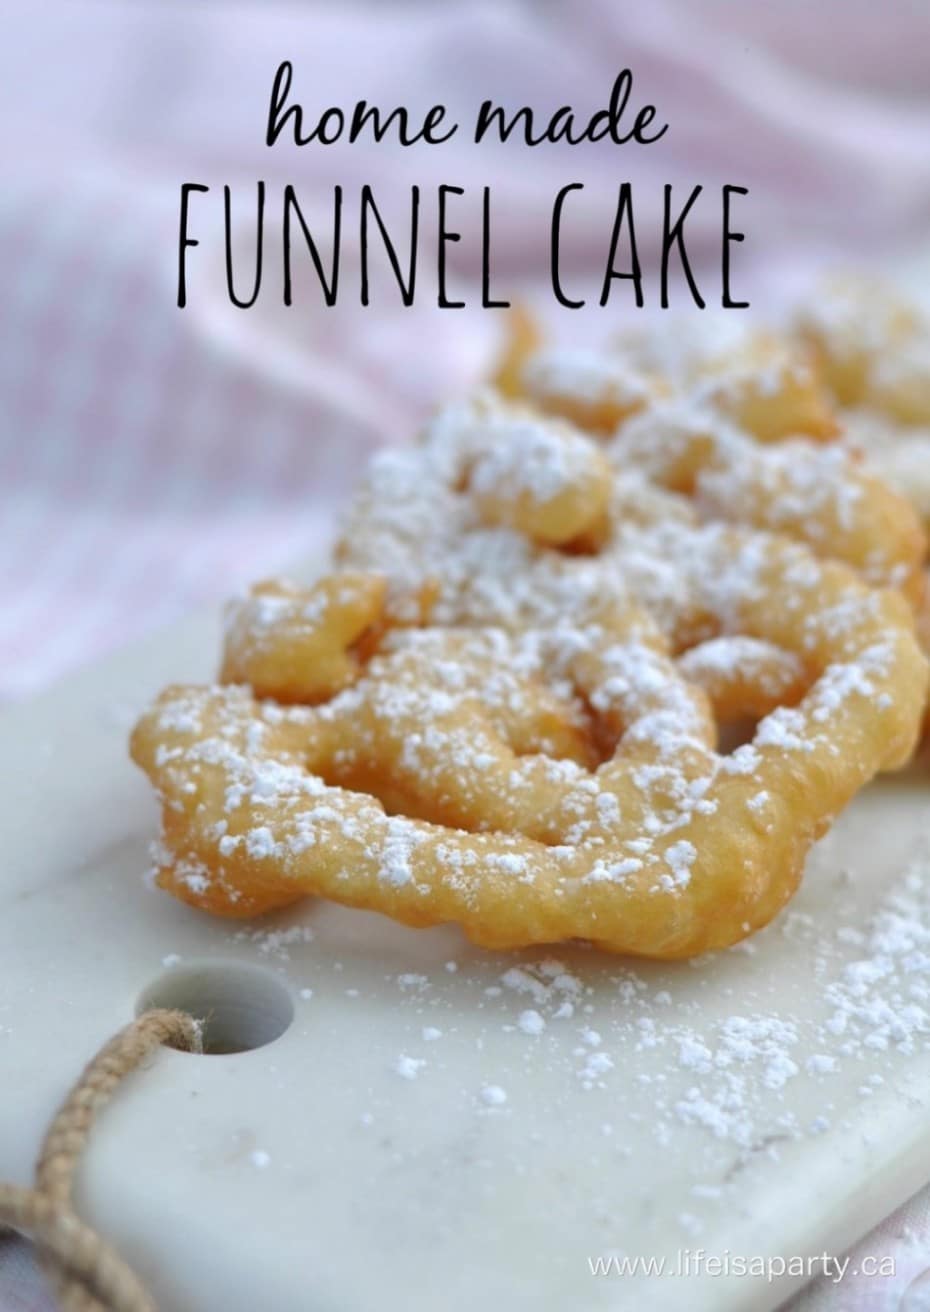 Residence made Funnel Cake Recipe -lift the carnival residence with this straight forward, cheap recipe sure to galvanize company, and remind you of a day at the magnificent.  Residence Made Funnel Cake funnel cakes 1